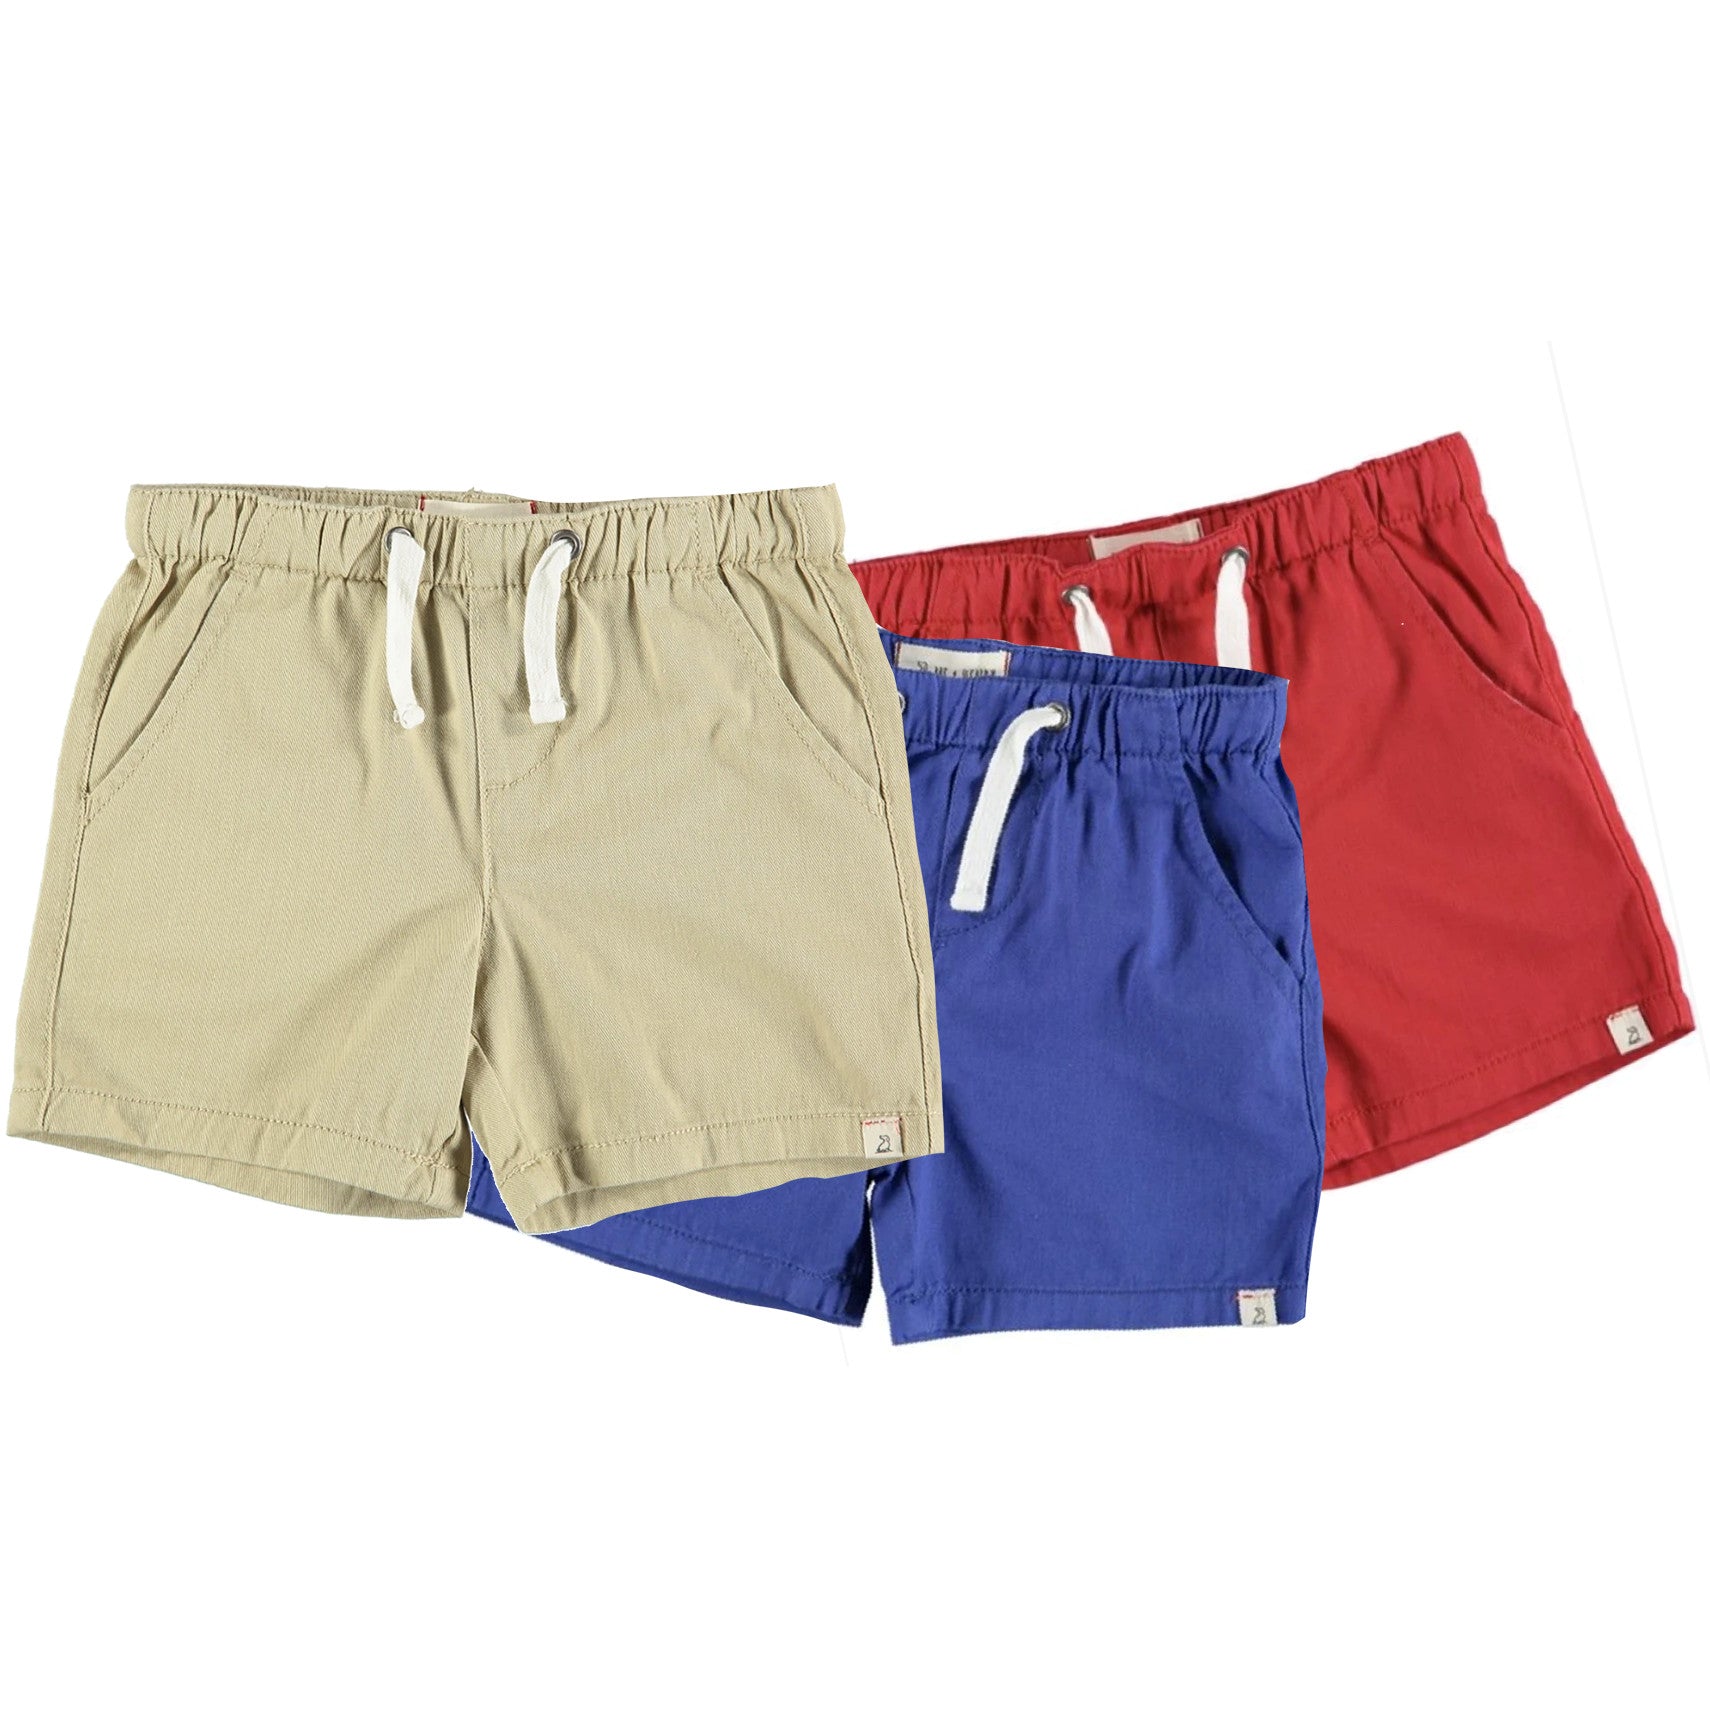 Kid's Twill Shorts - Surf, Wind and Fire